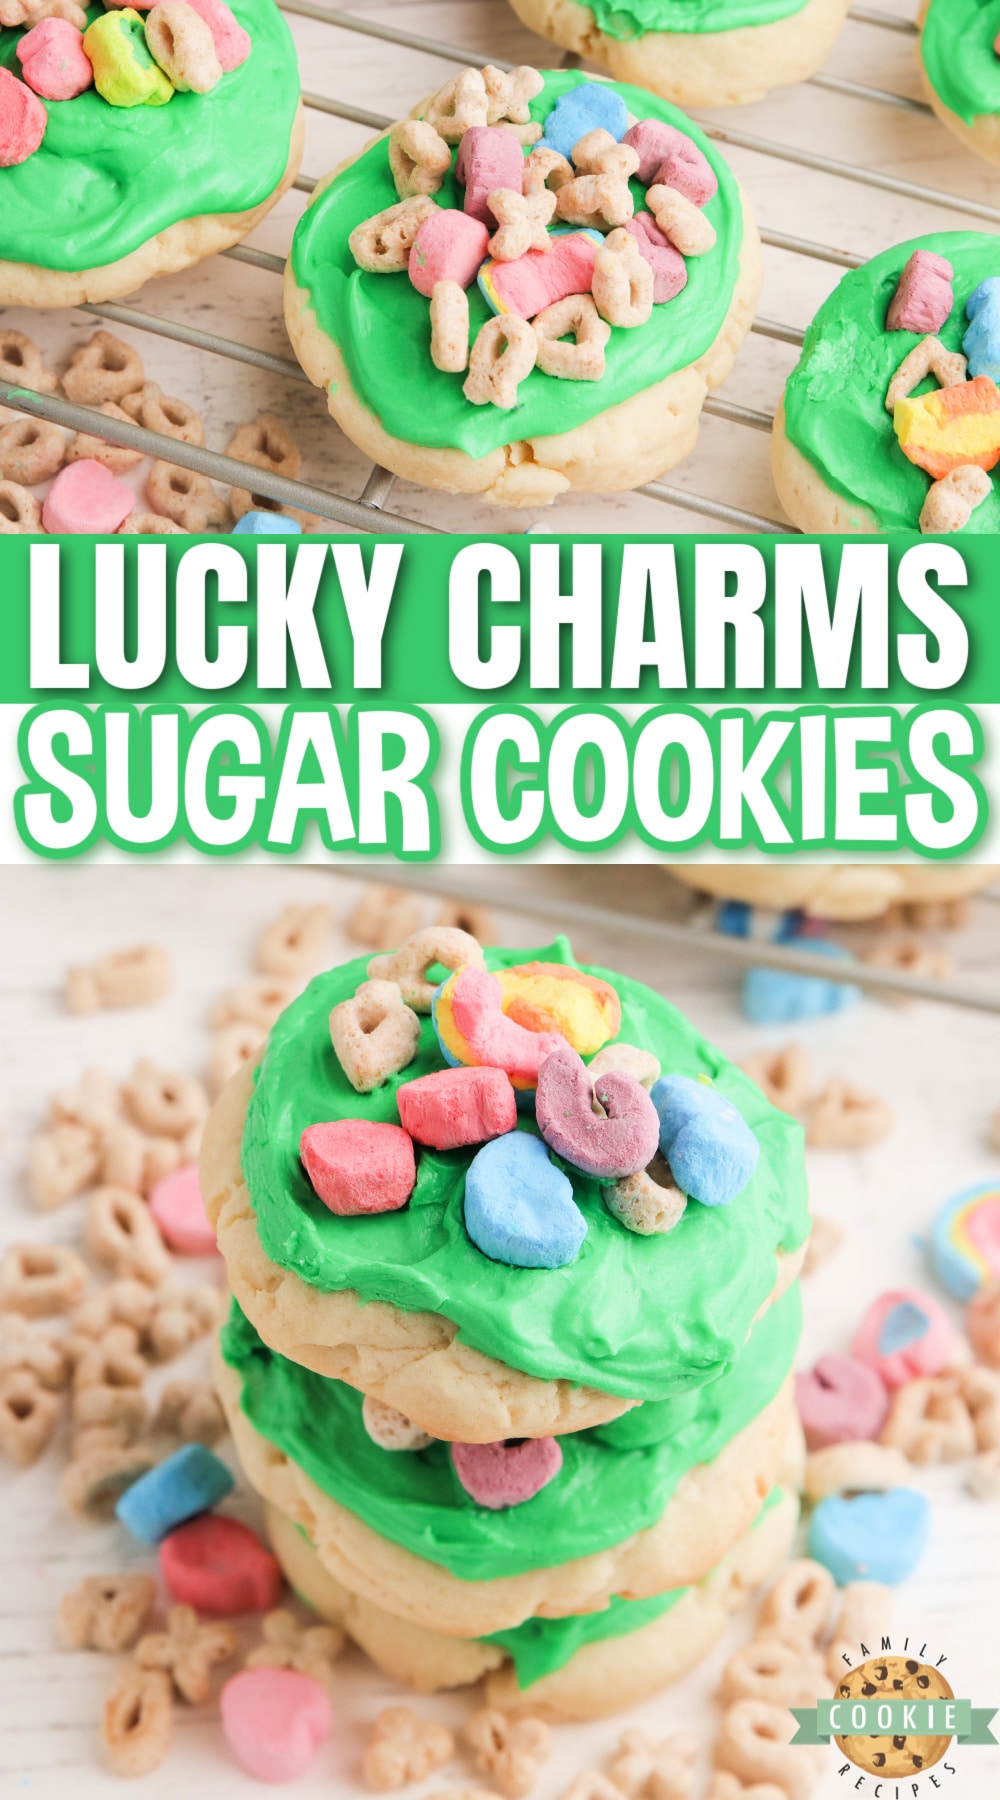 Lucky Charms Sugar Cookies are soft, sweet and perfect for St. Patrick's Day! Absolutely perfect cream cheese sugar cookie recipe frosted with a simple buttercream frosting and topped with Lucky Charms cereal.